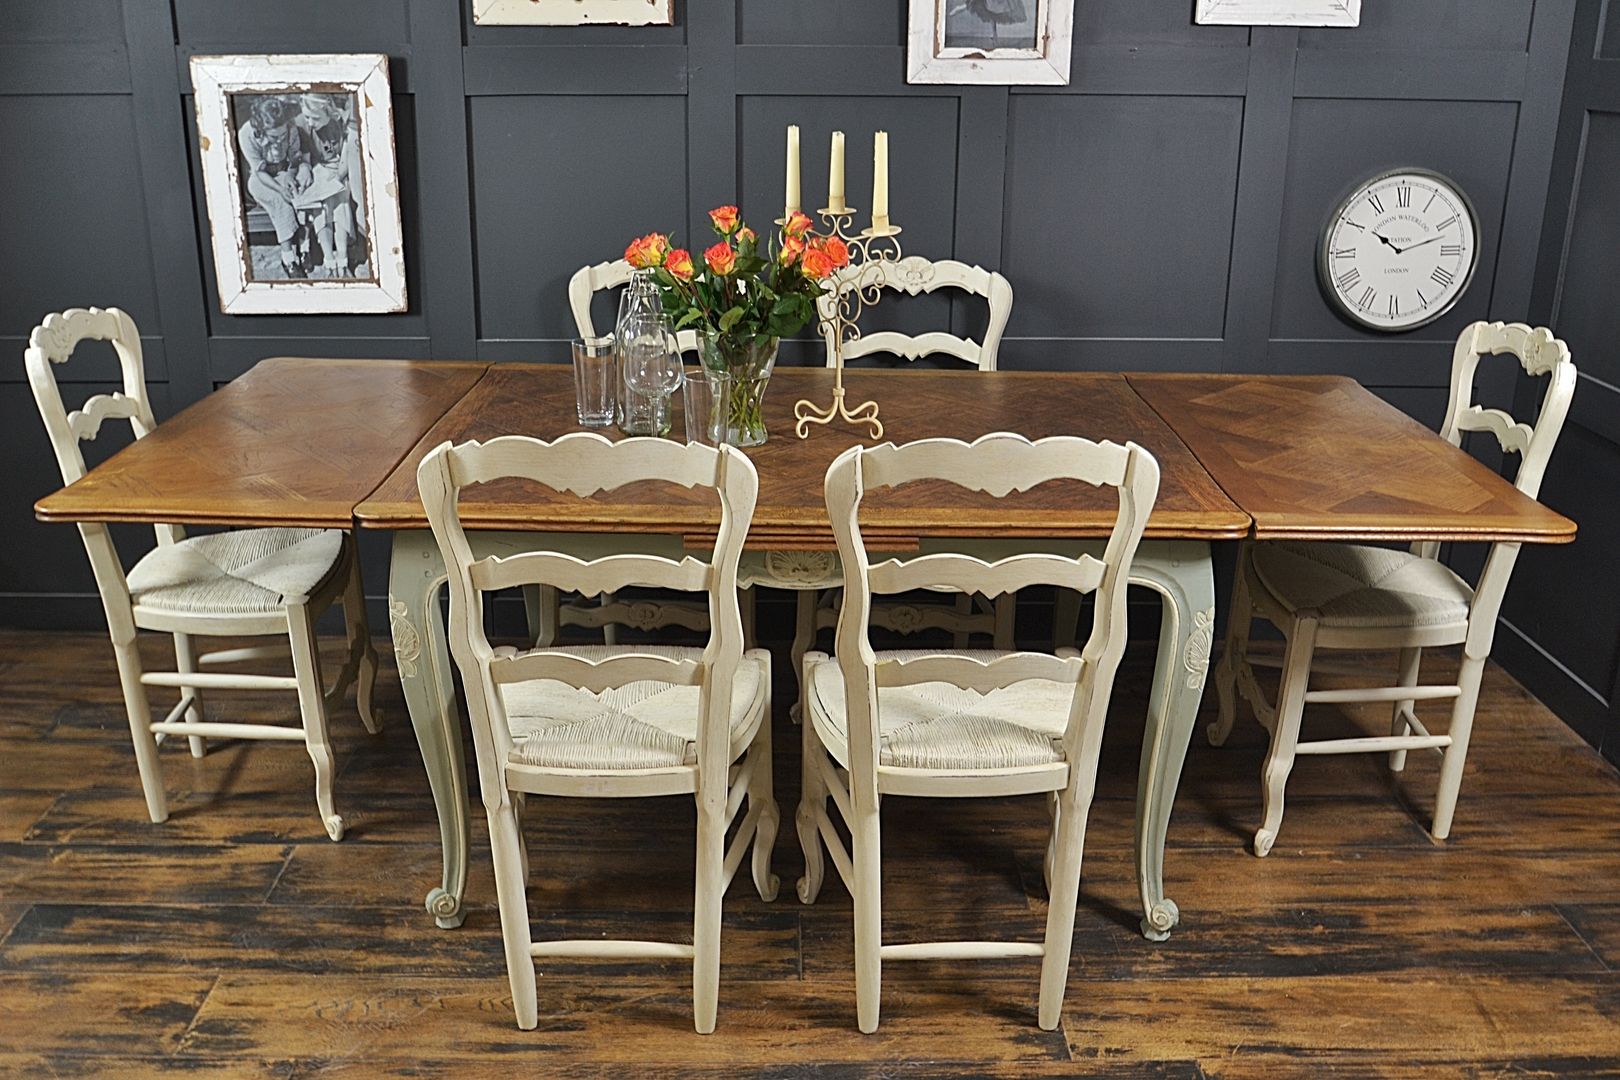 Shabby Chic French Oak Dining Table with 6 Chairs in Rococo, The Treasure Trove Shabby Chic & Vintage Furniture The Treasure Trove Shabby Chic & Vintage Furniture Comedores de estilo clásico Mesas